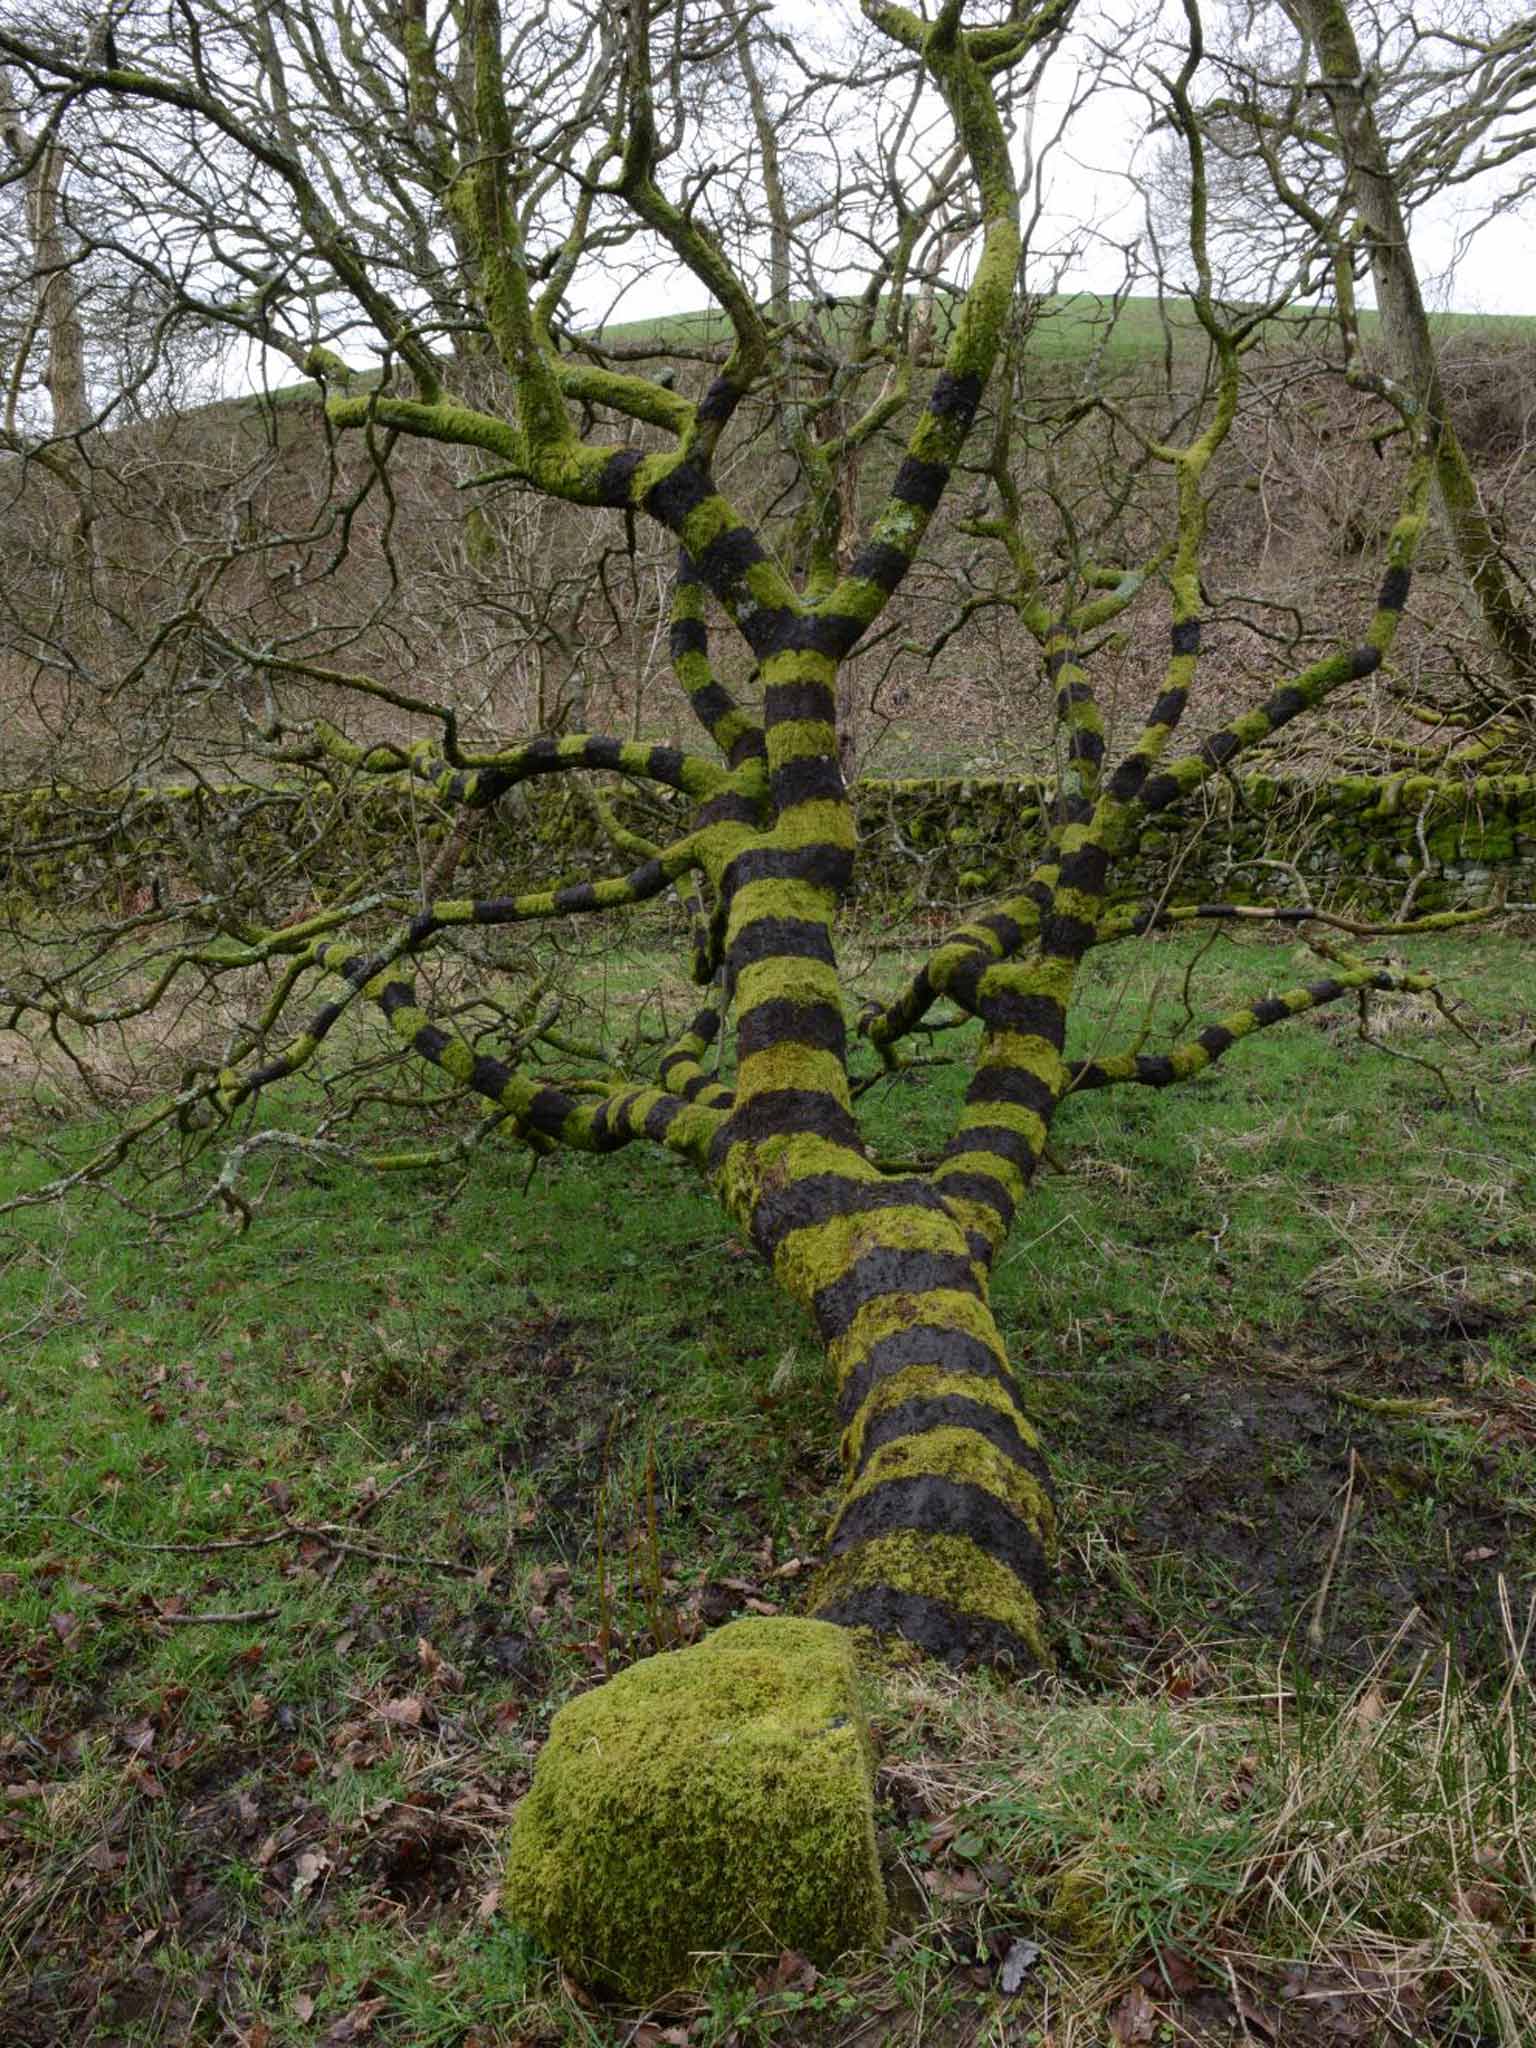 Tree painted with black mud, Dumfriesshire, 21 March 2014